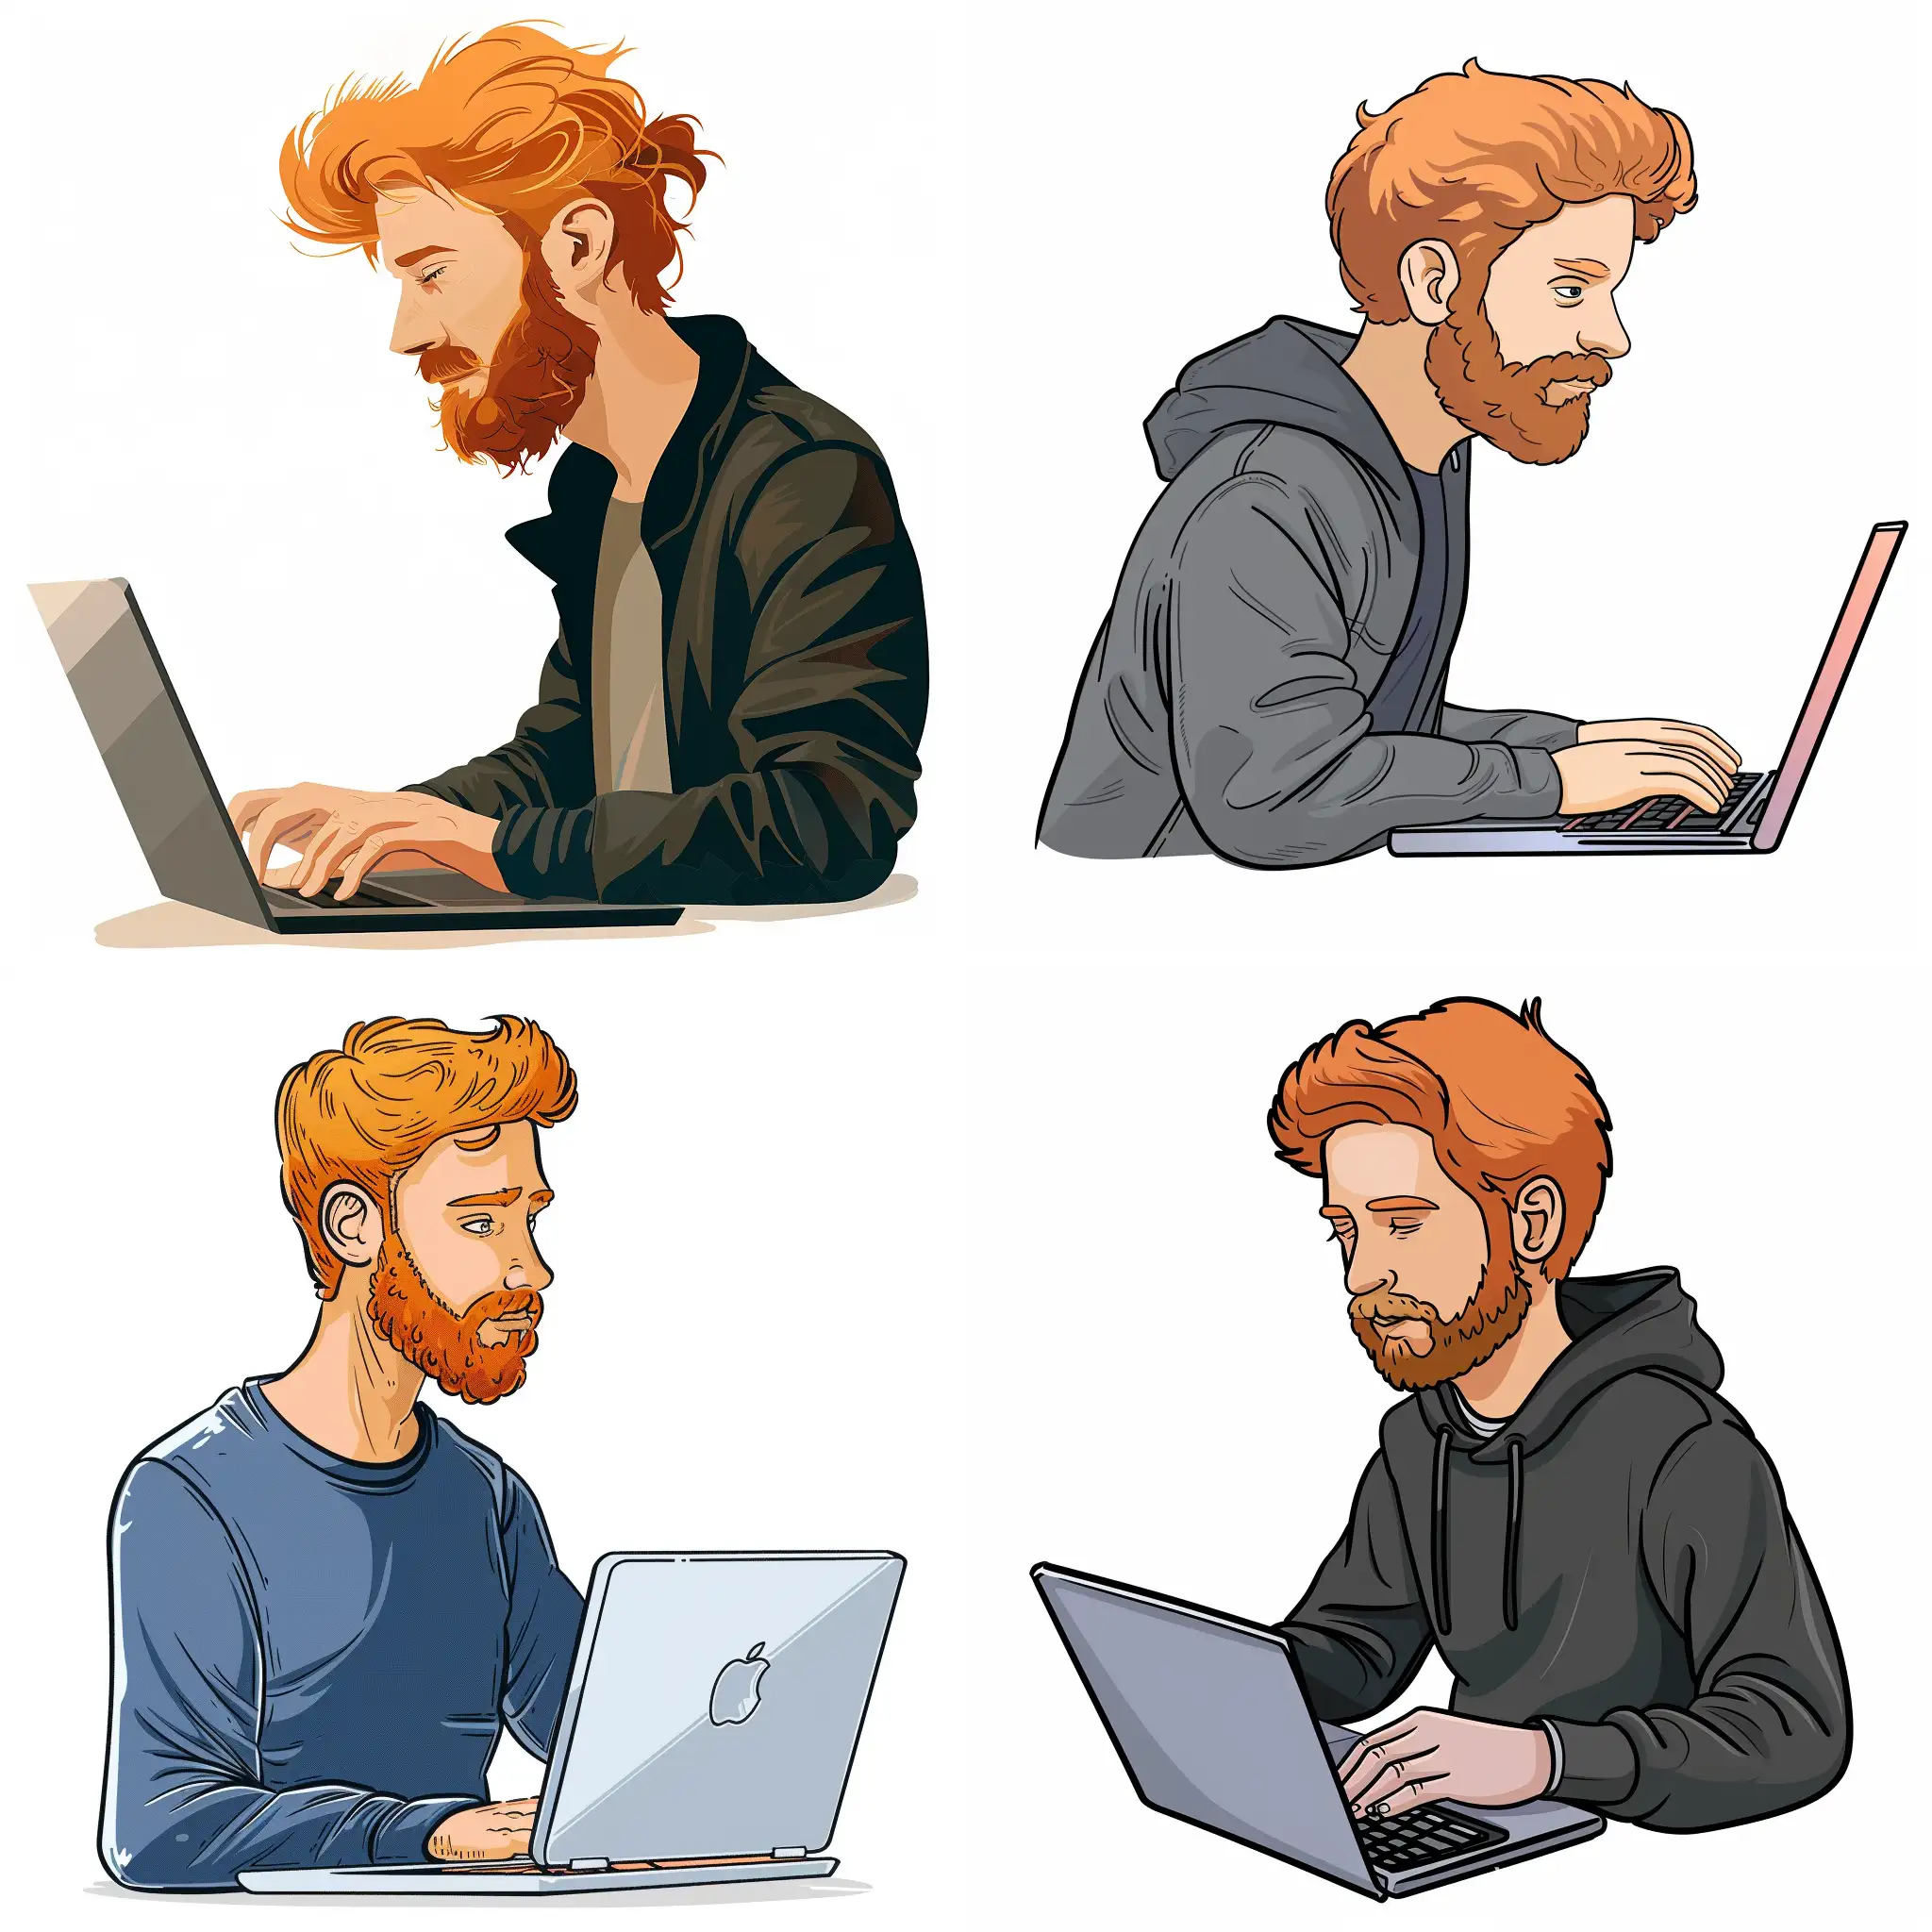 Cool-GingerHaired-Man-Coding-on-Laptop